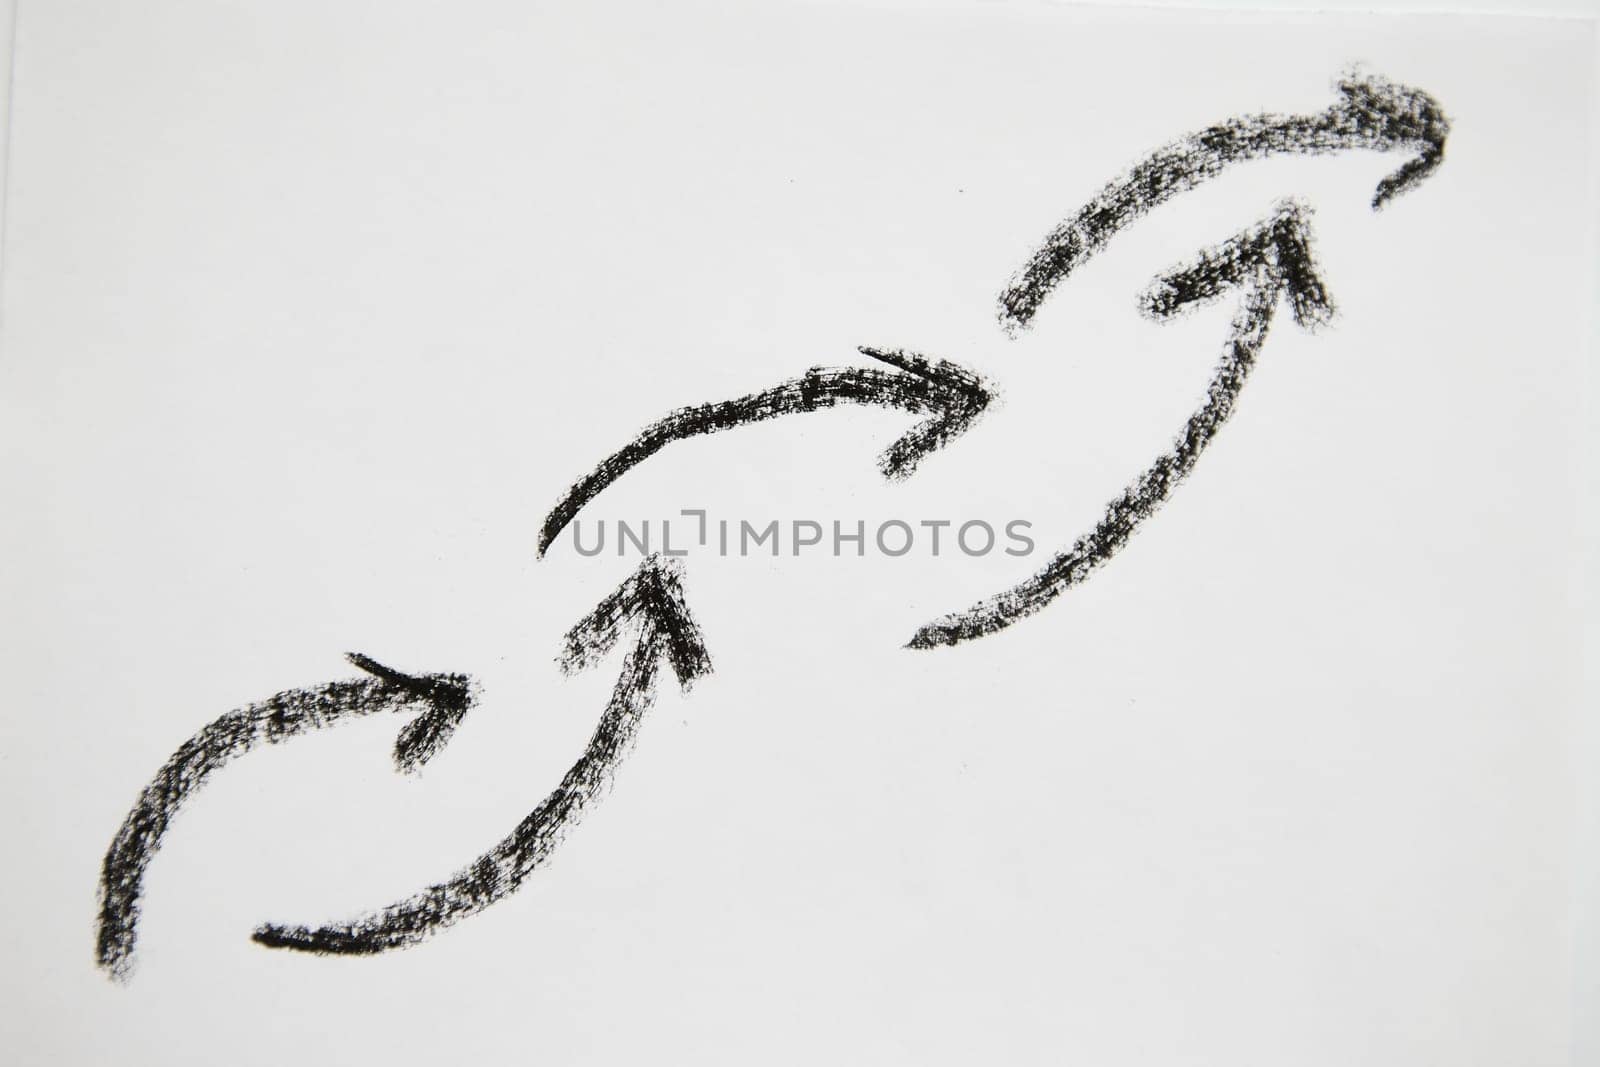 Many graceful smooth Hand drawn black chalk arrows like a chain. The concept of business, choosing direction, moving forward. Abstract sign, background, texture. Blurred by keleny